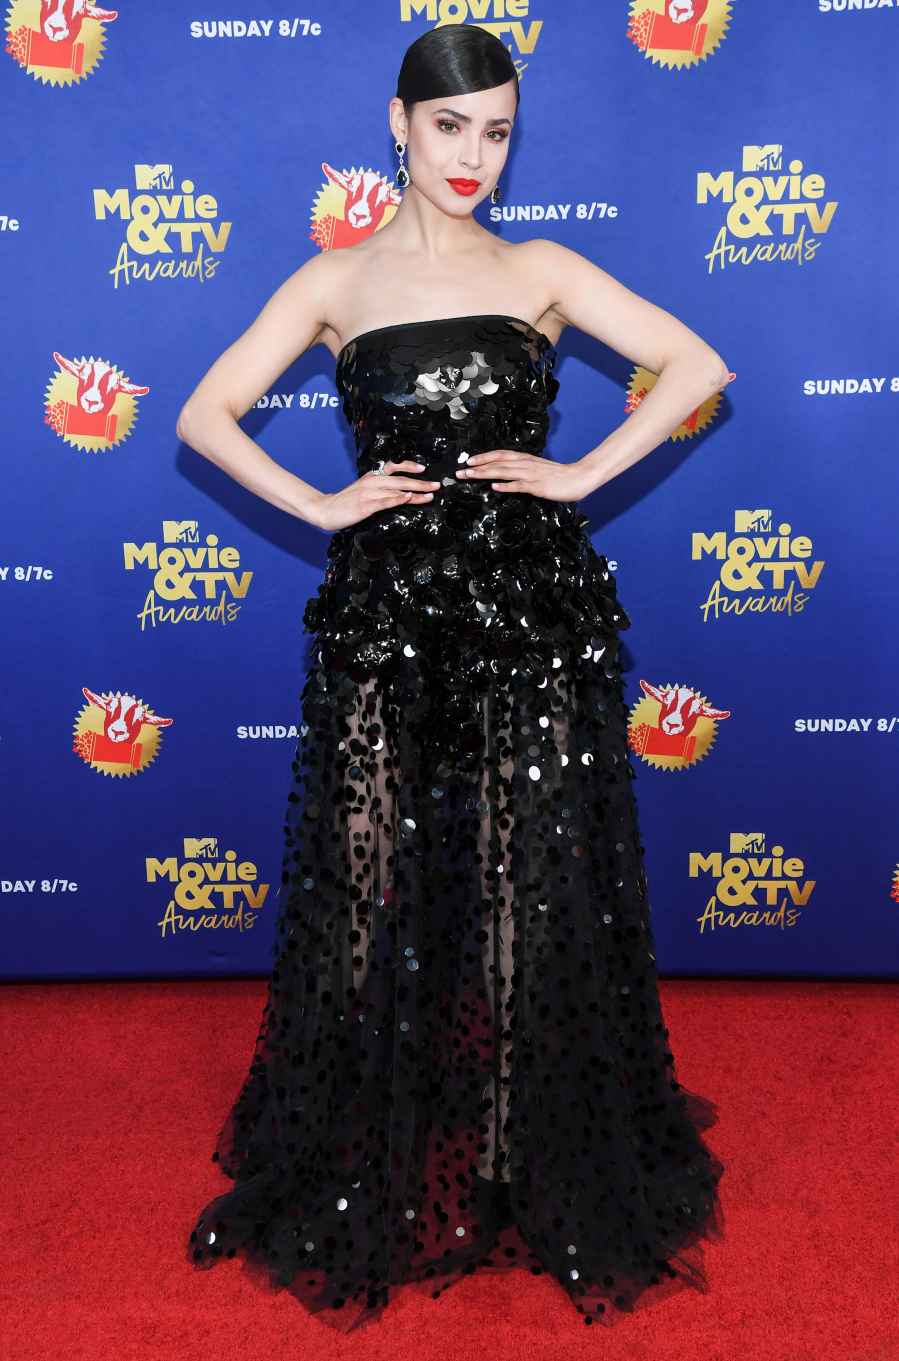 Top 5 Looks From the MTV Movie & TV Awards